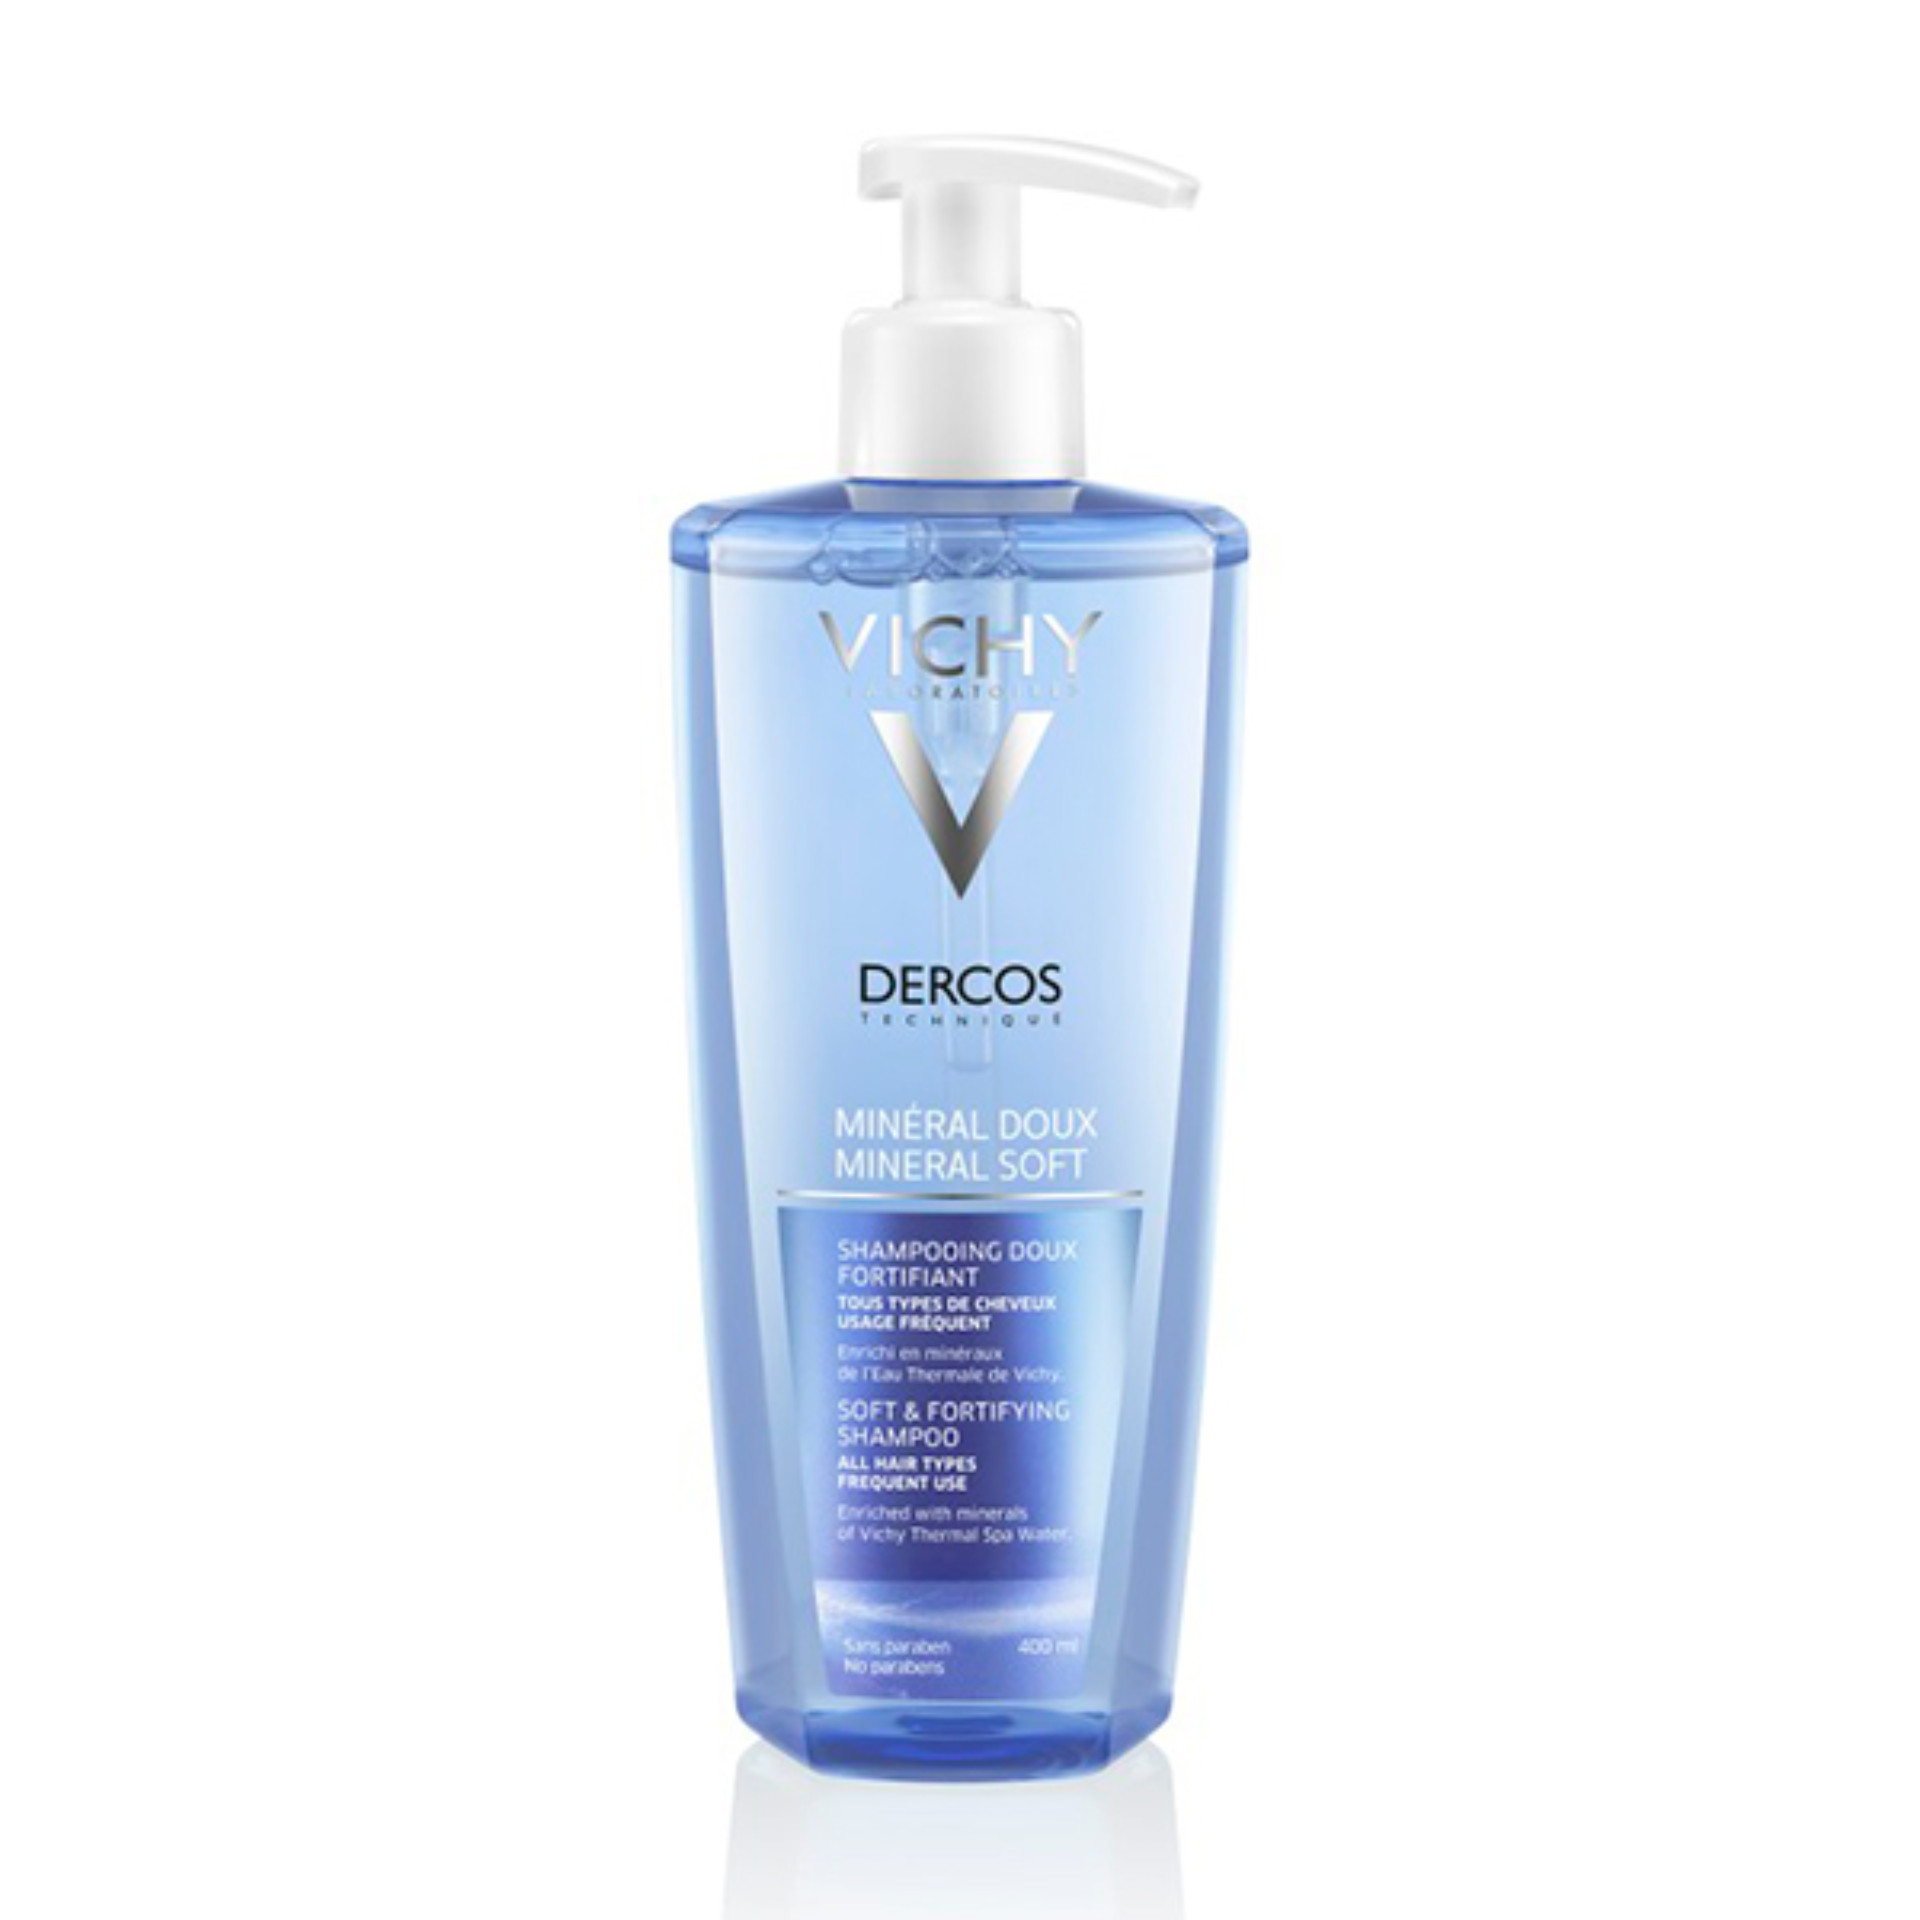 Vichy Dercos Champ Fortificante Mineral Suave